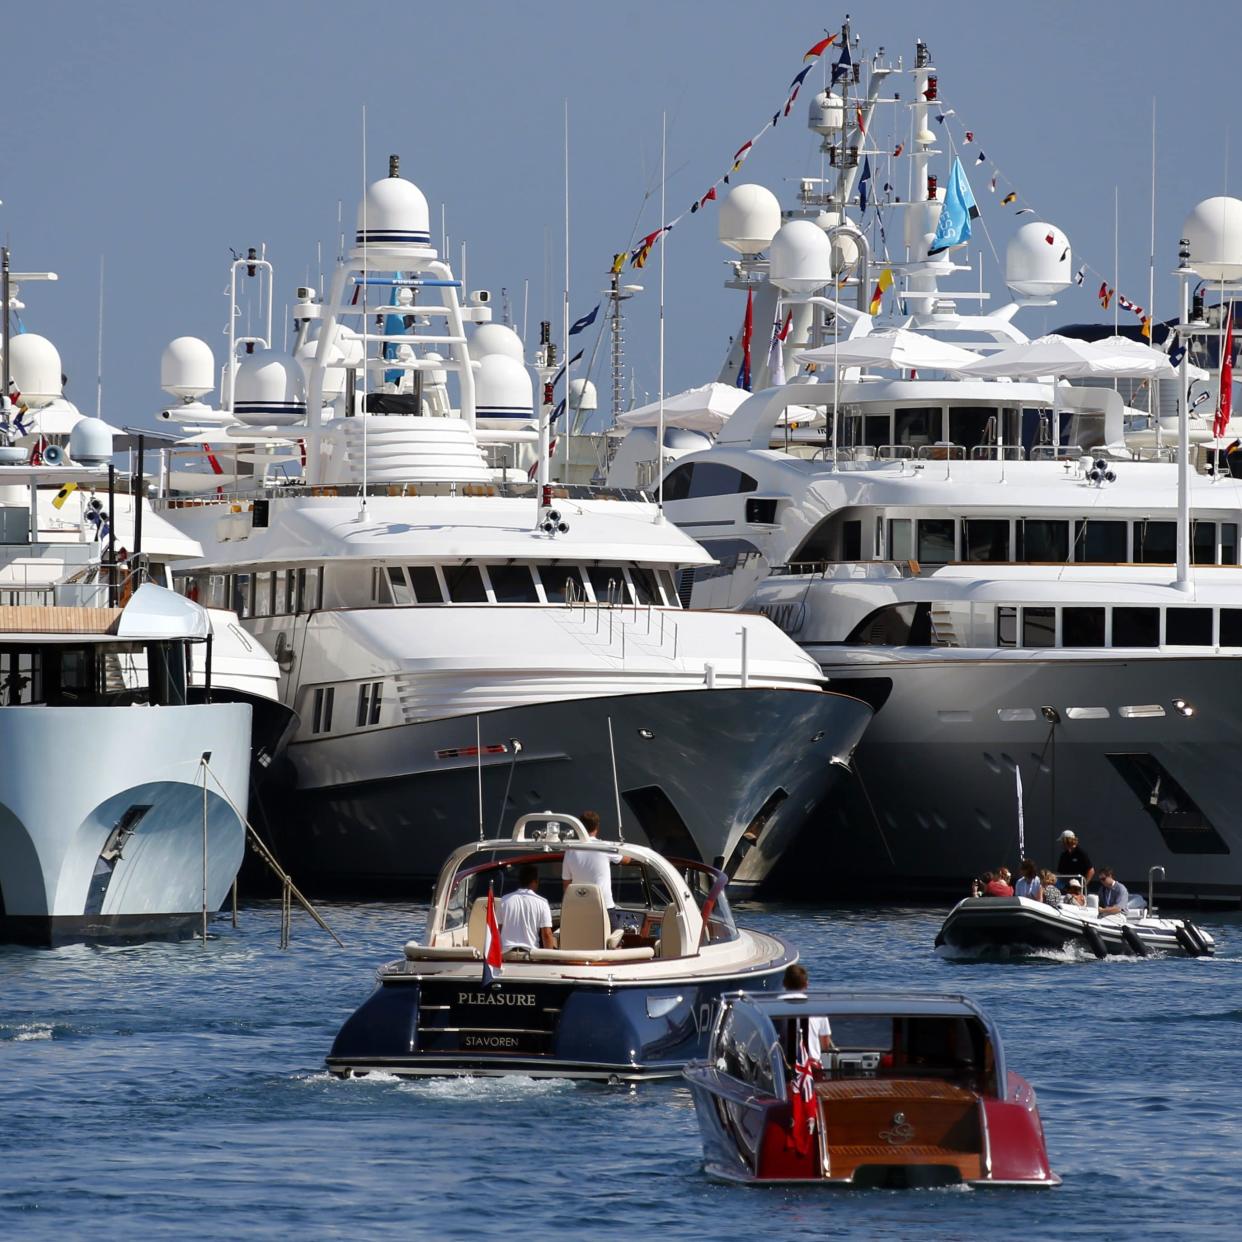 Tender traffic as buyers and brokers make their way to the superyachts on display at the Monaco Yacht Show - 2012 AFP